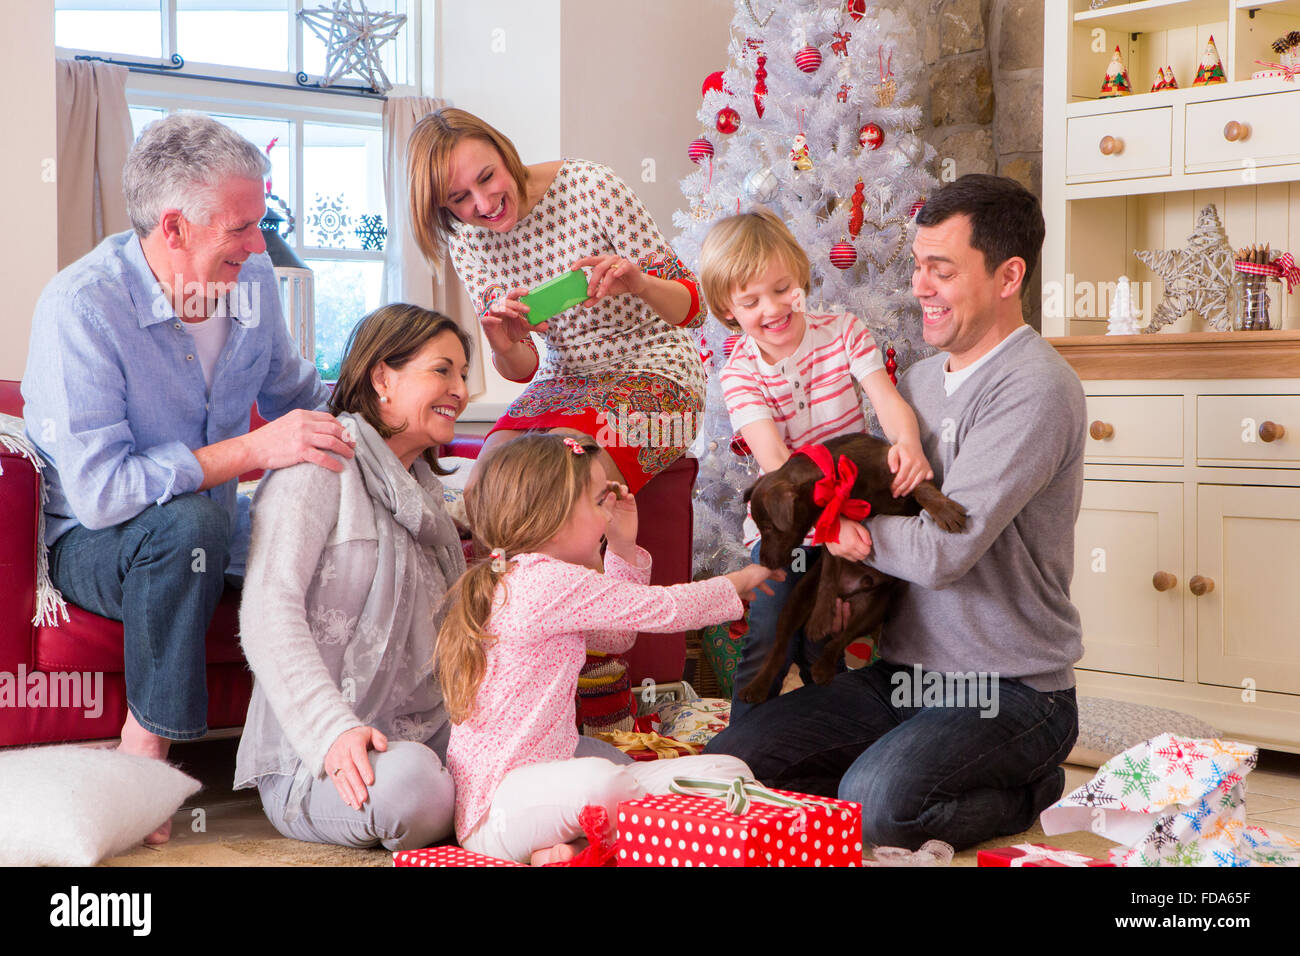 Three Generation Family at Christmas Time. Dad holds a small brown dog with a ribbon tied around its collar and everyone looks s Stock Photo